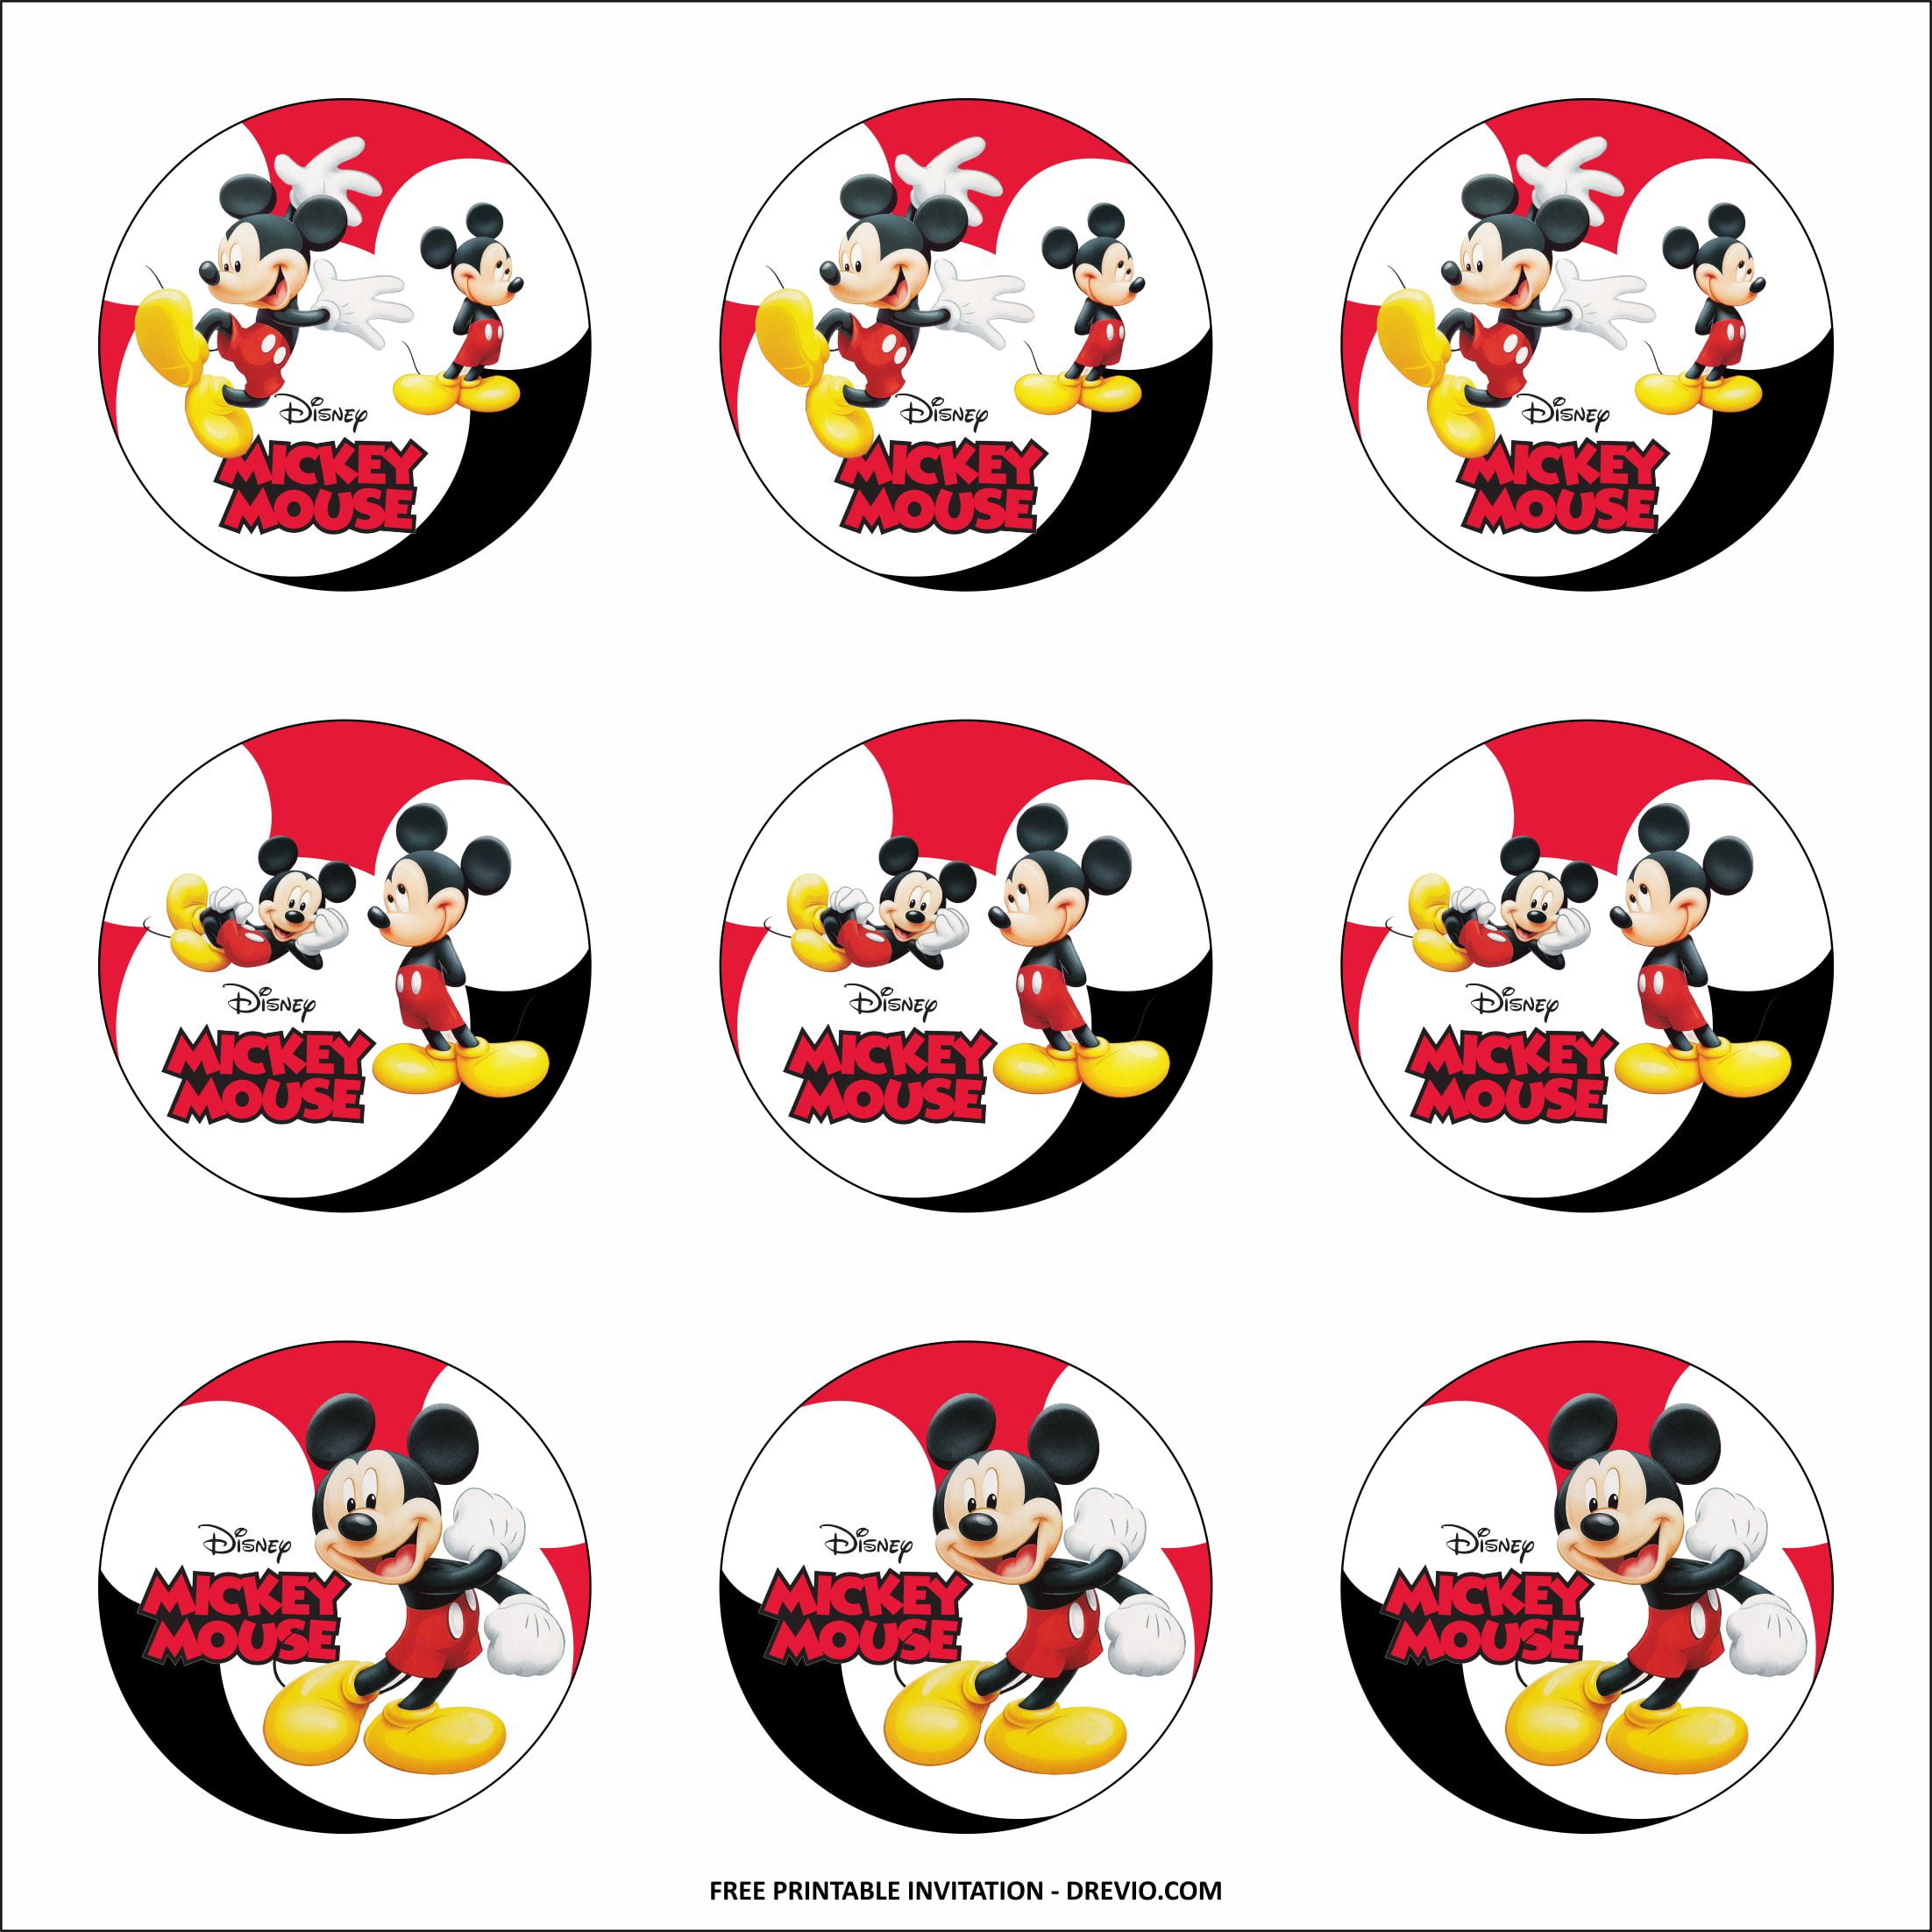 (FREE PRINTABLE) Mickey Mouse Birthday Party Kits Template Download